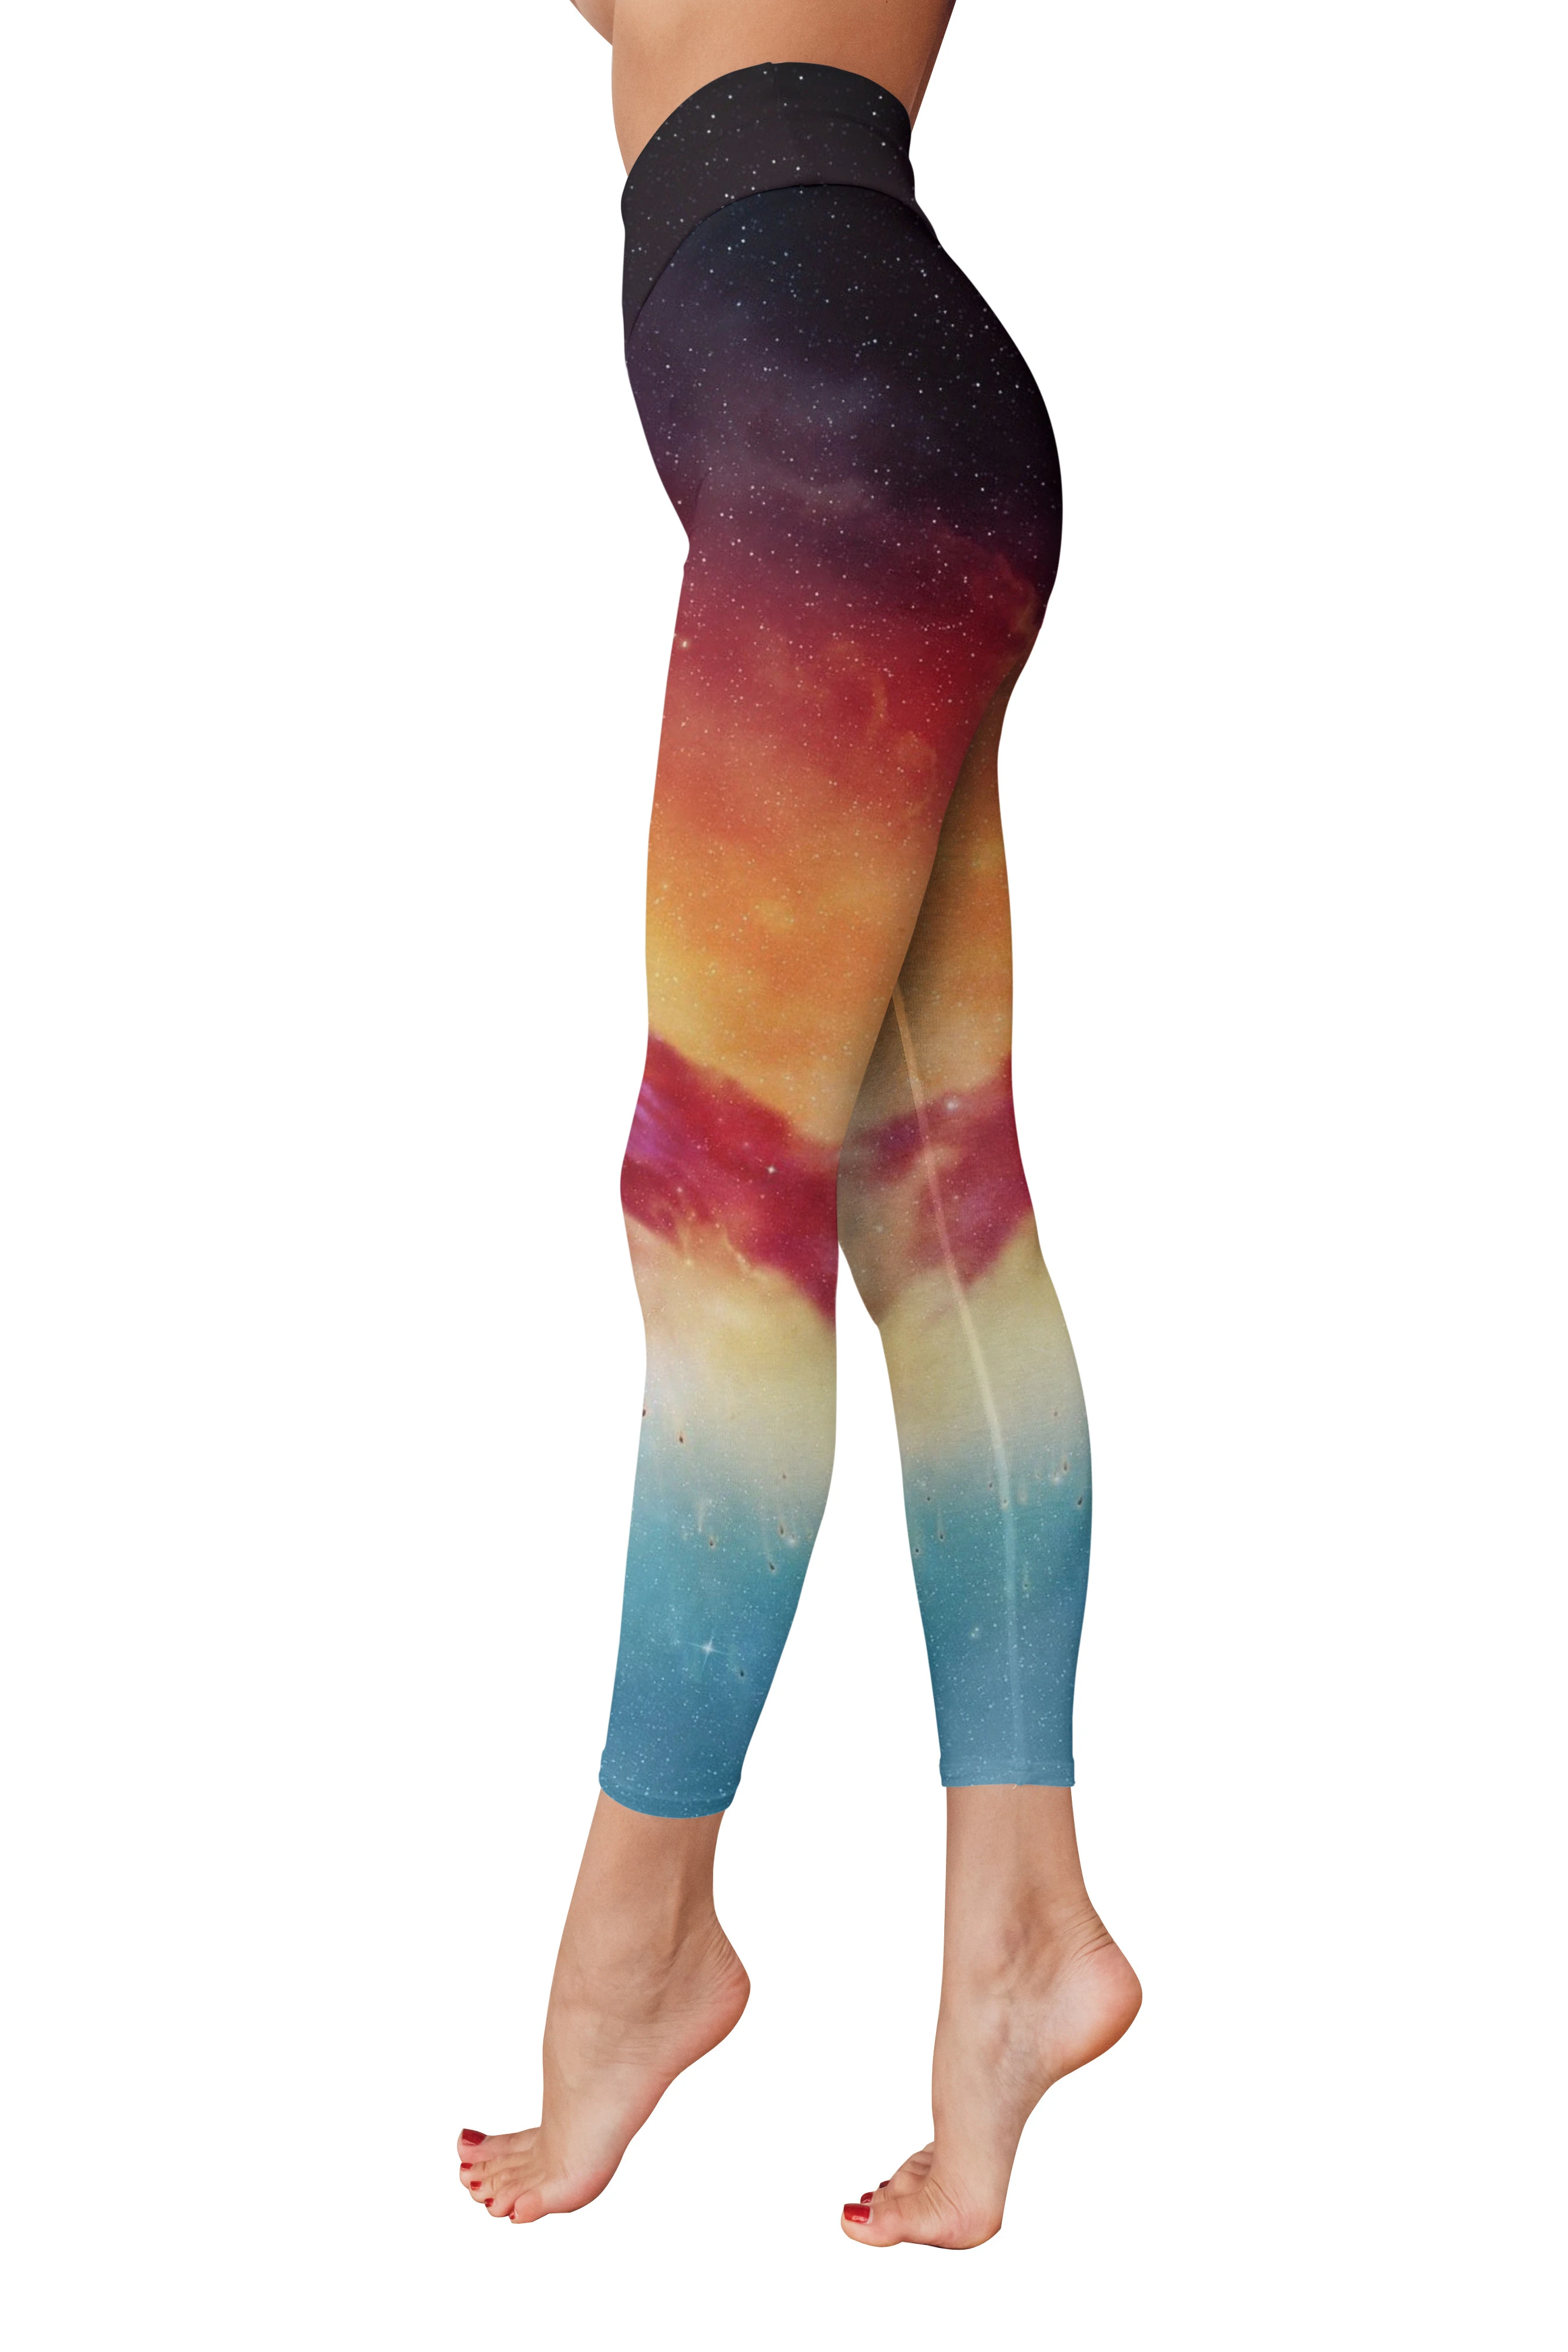 Design Your Own Brand Sublimation Starry Night Yoga Sports Apparel Yoga Leggings Pants Wholesale